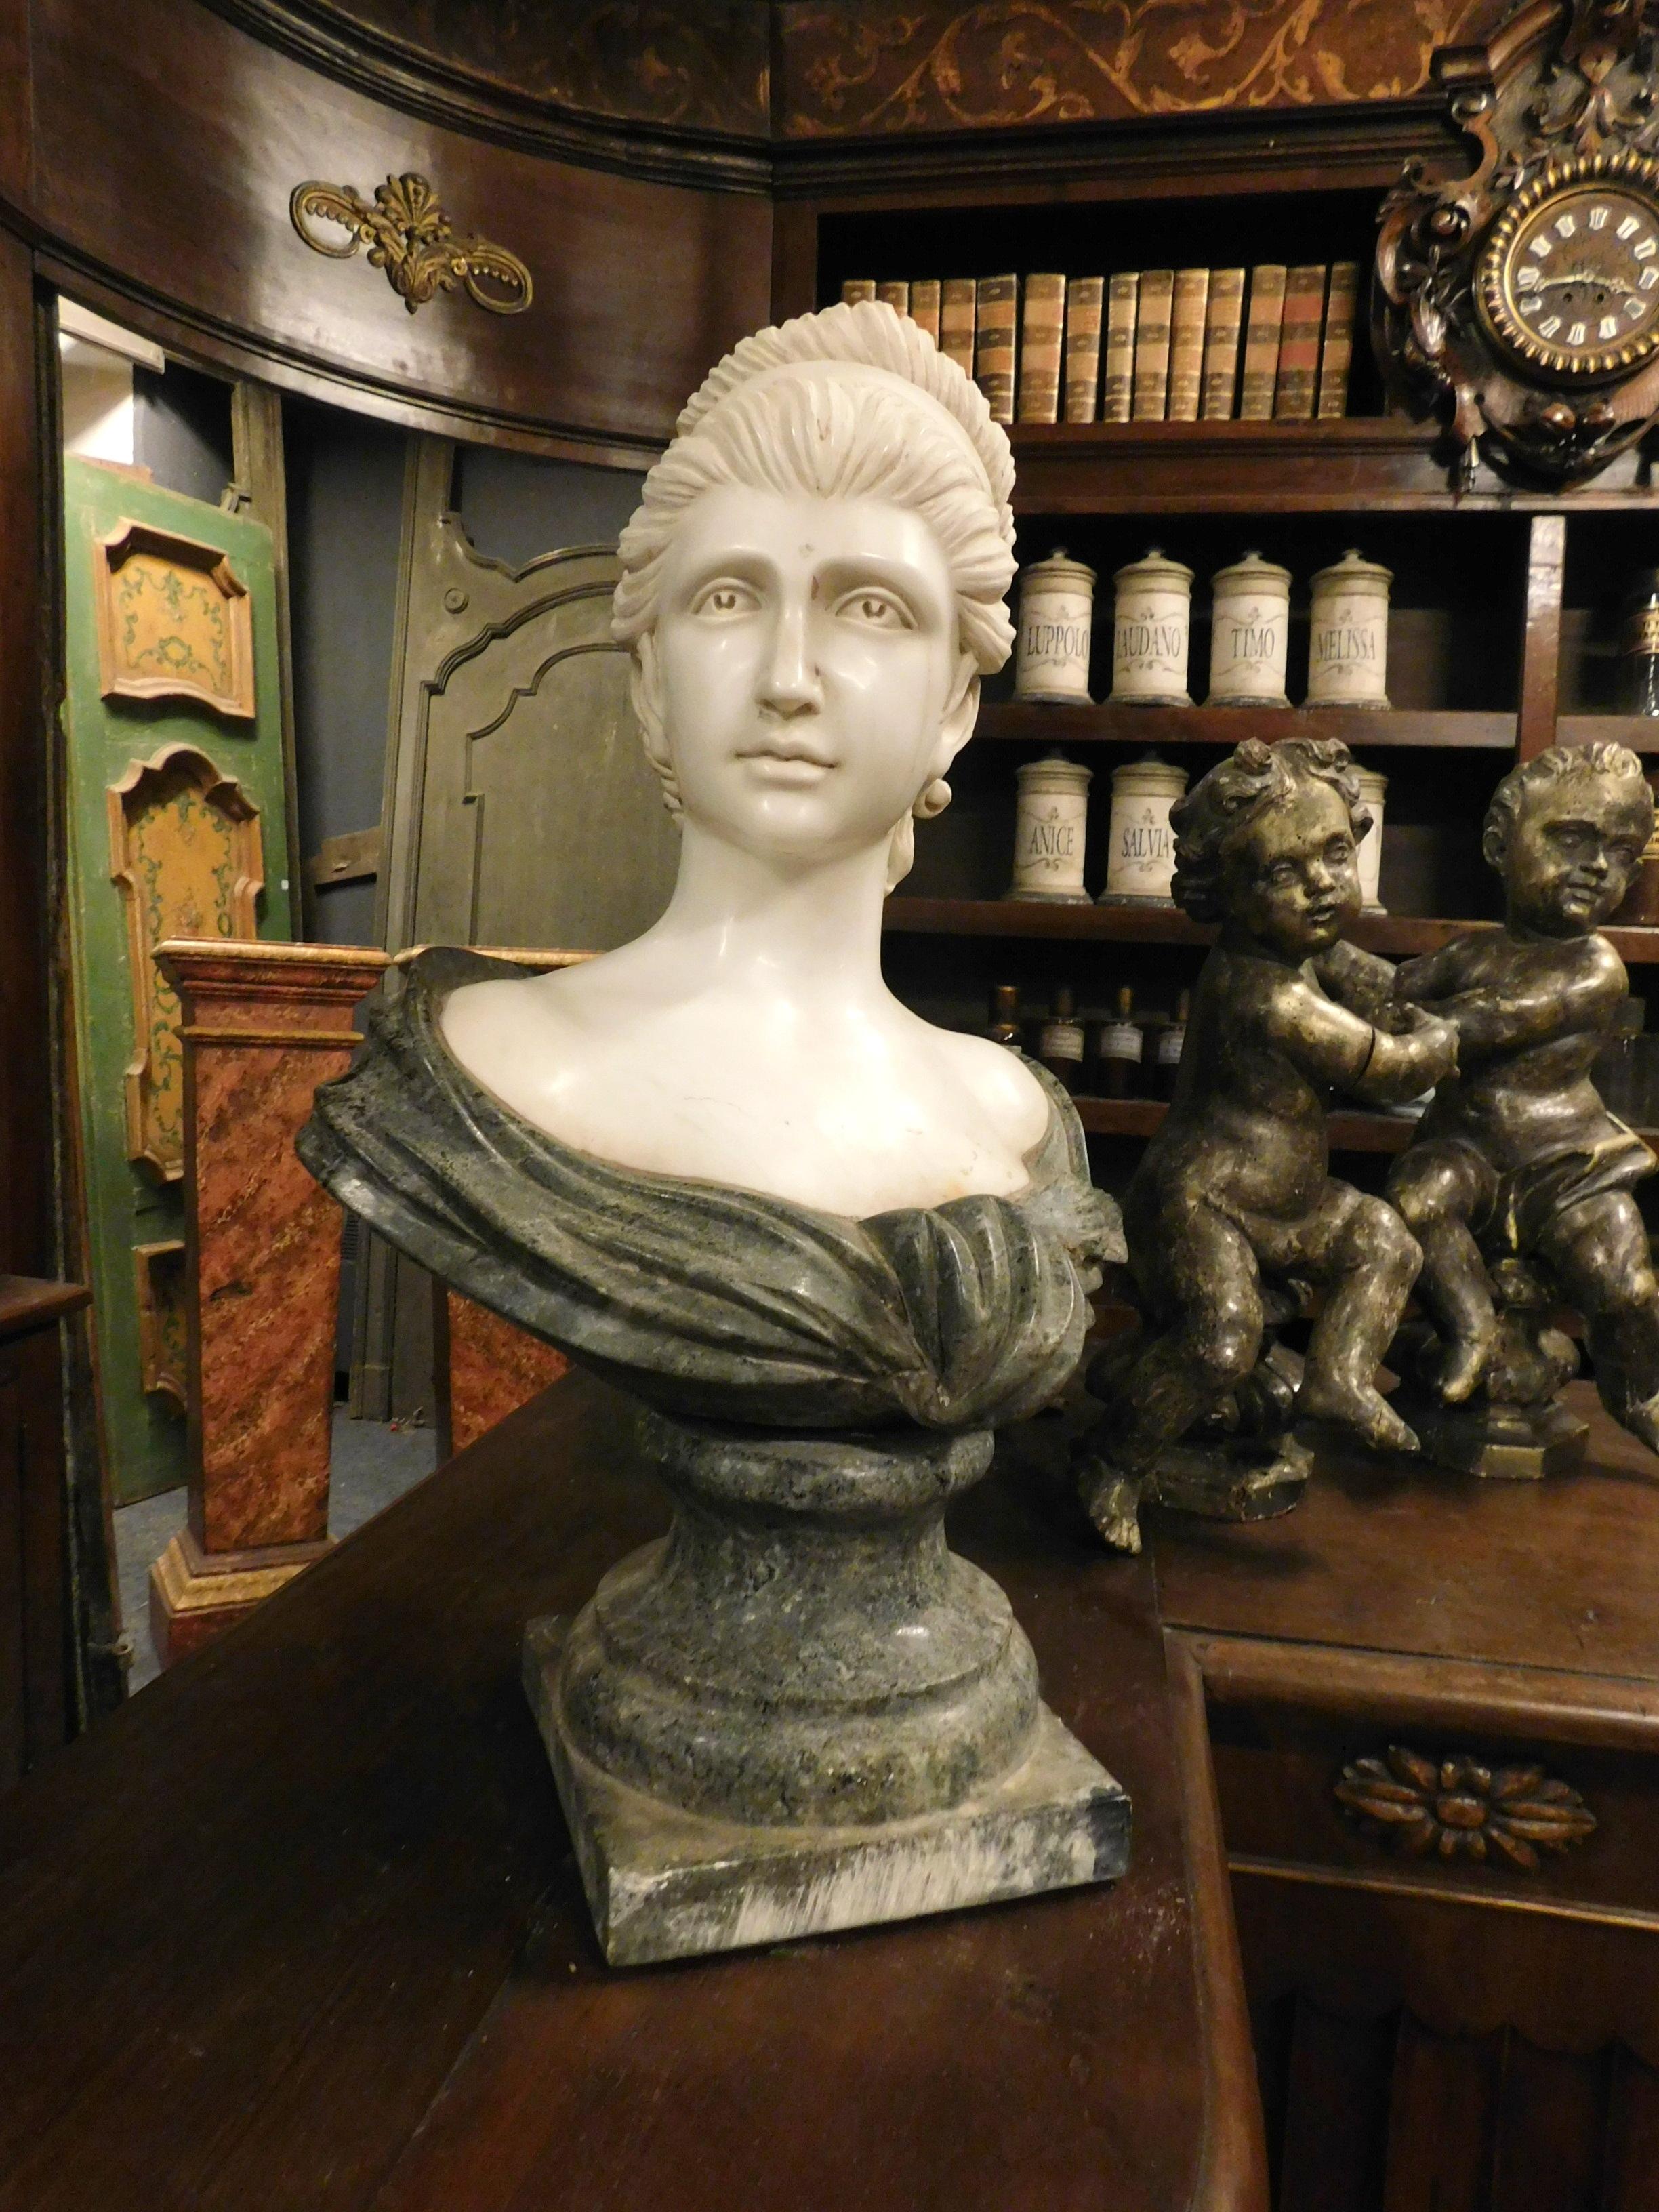 Antique Bust of a woman, hand-carved statue in prezisos white Carrara marble and green Serpentine marble, depicting a damsel from the 19th century in Italy.
 Measure cm W 37 x H 64 x D 28.